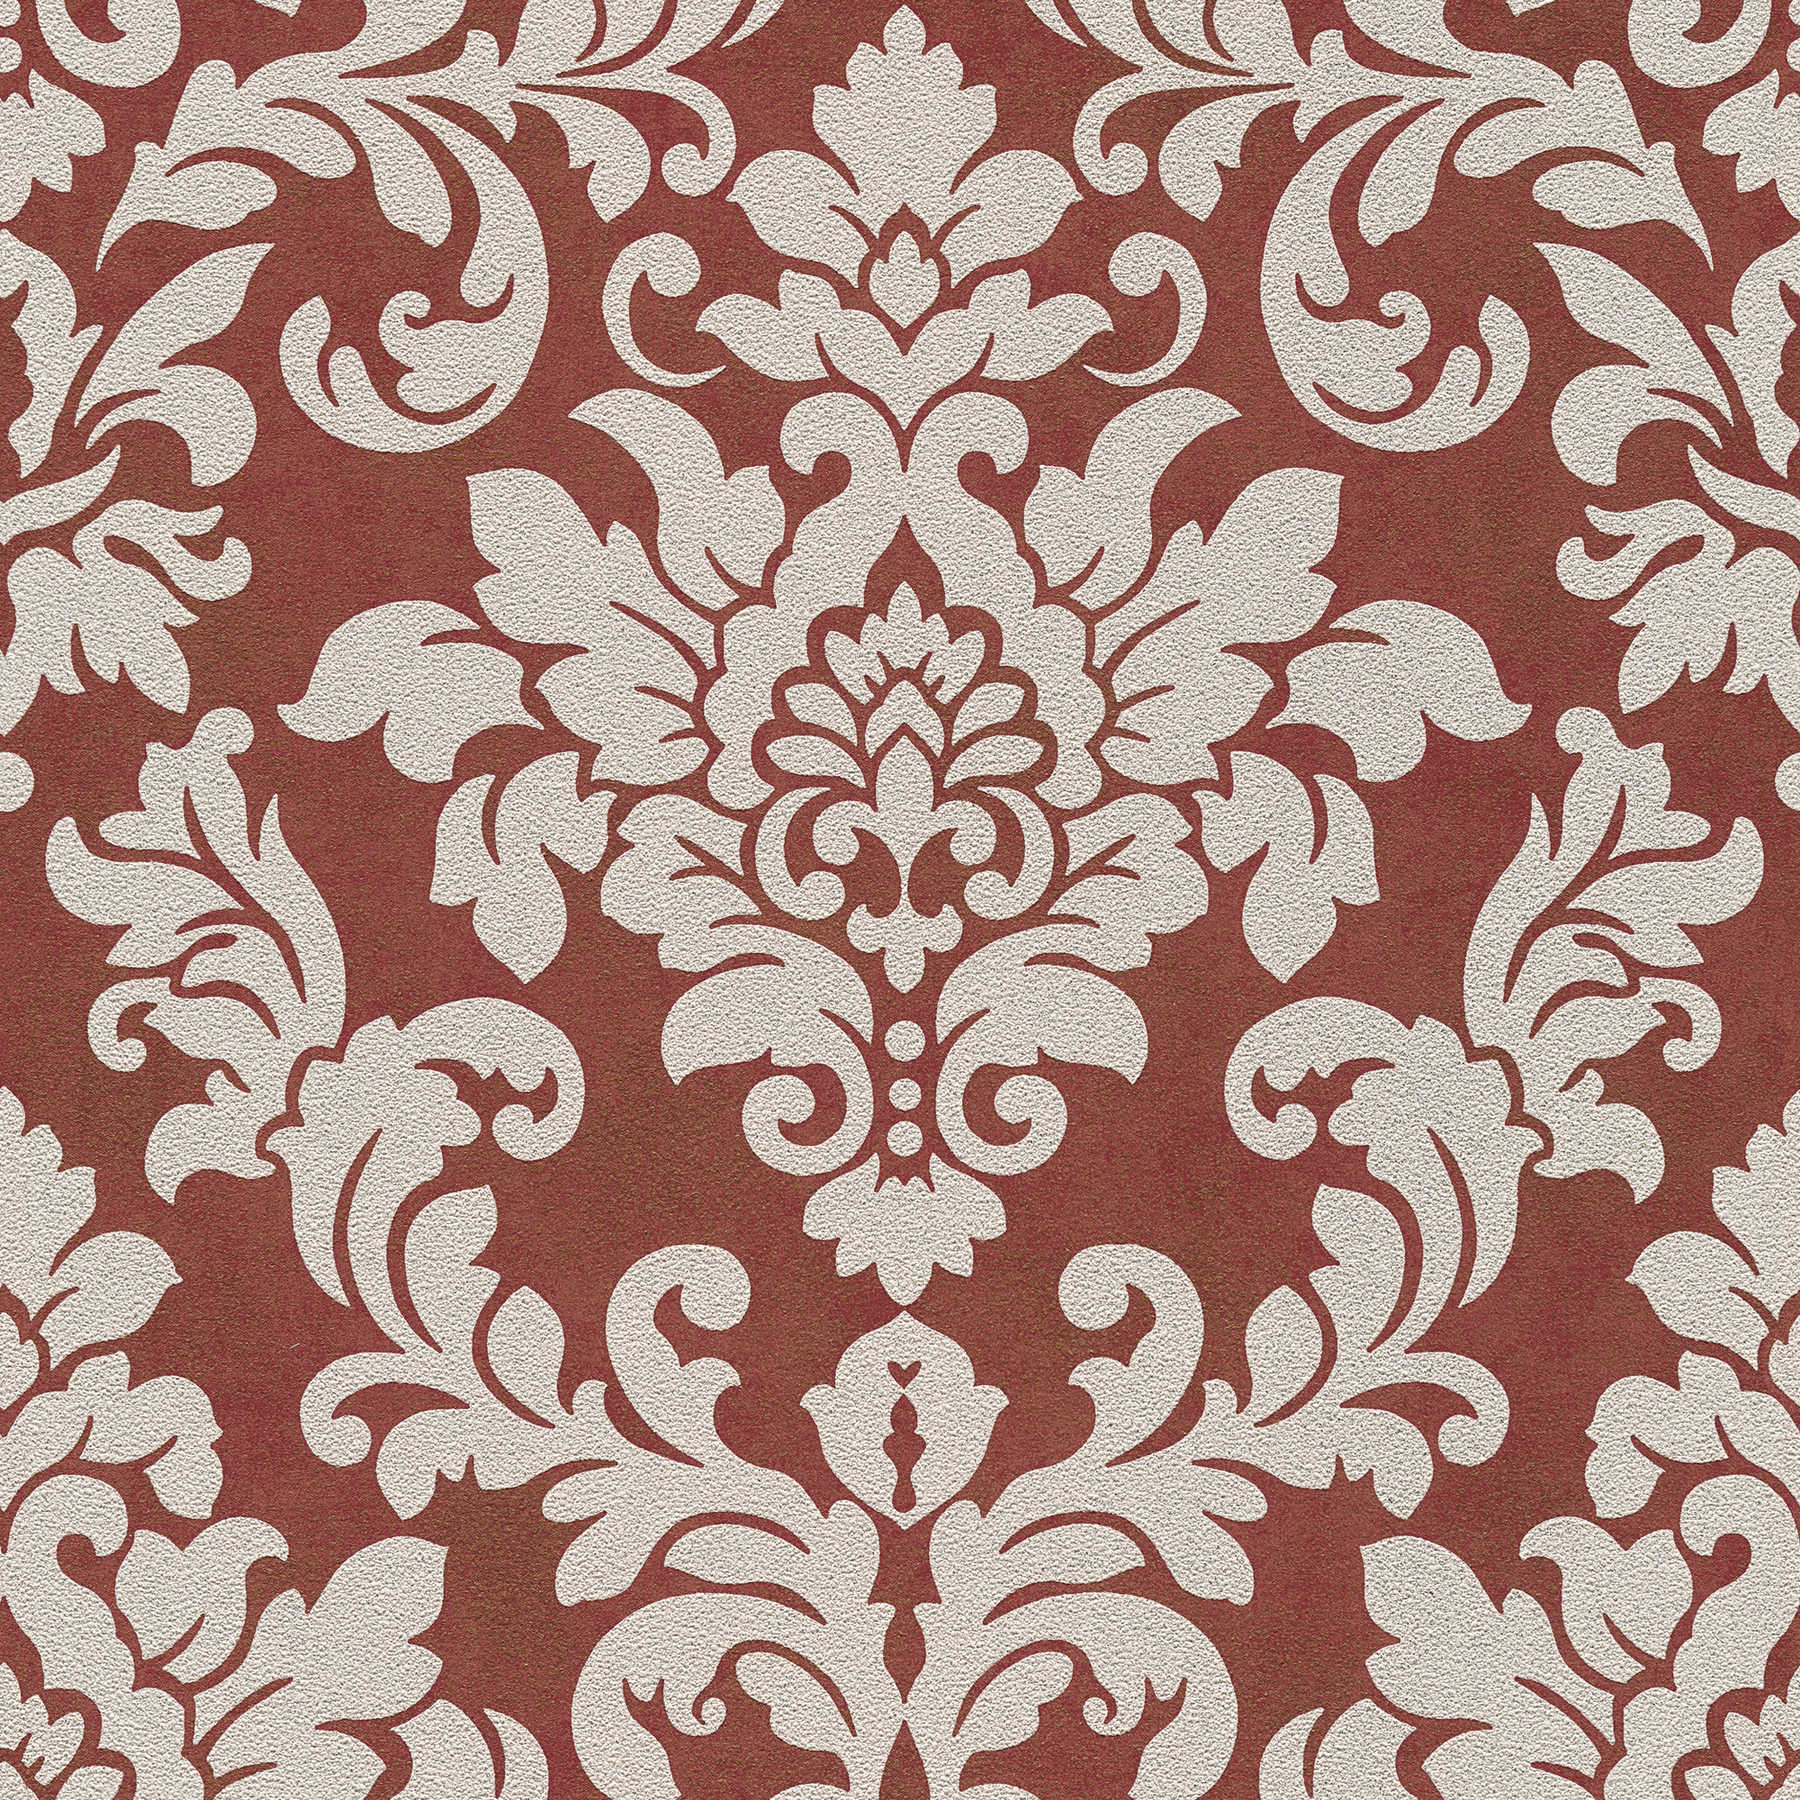 Floral ornamental wallpaper with metallic effect - red, gold, beige
